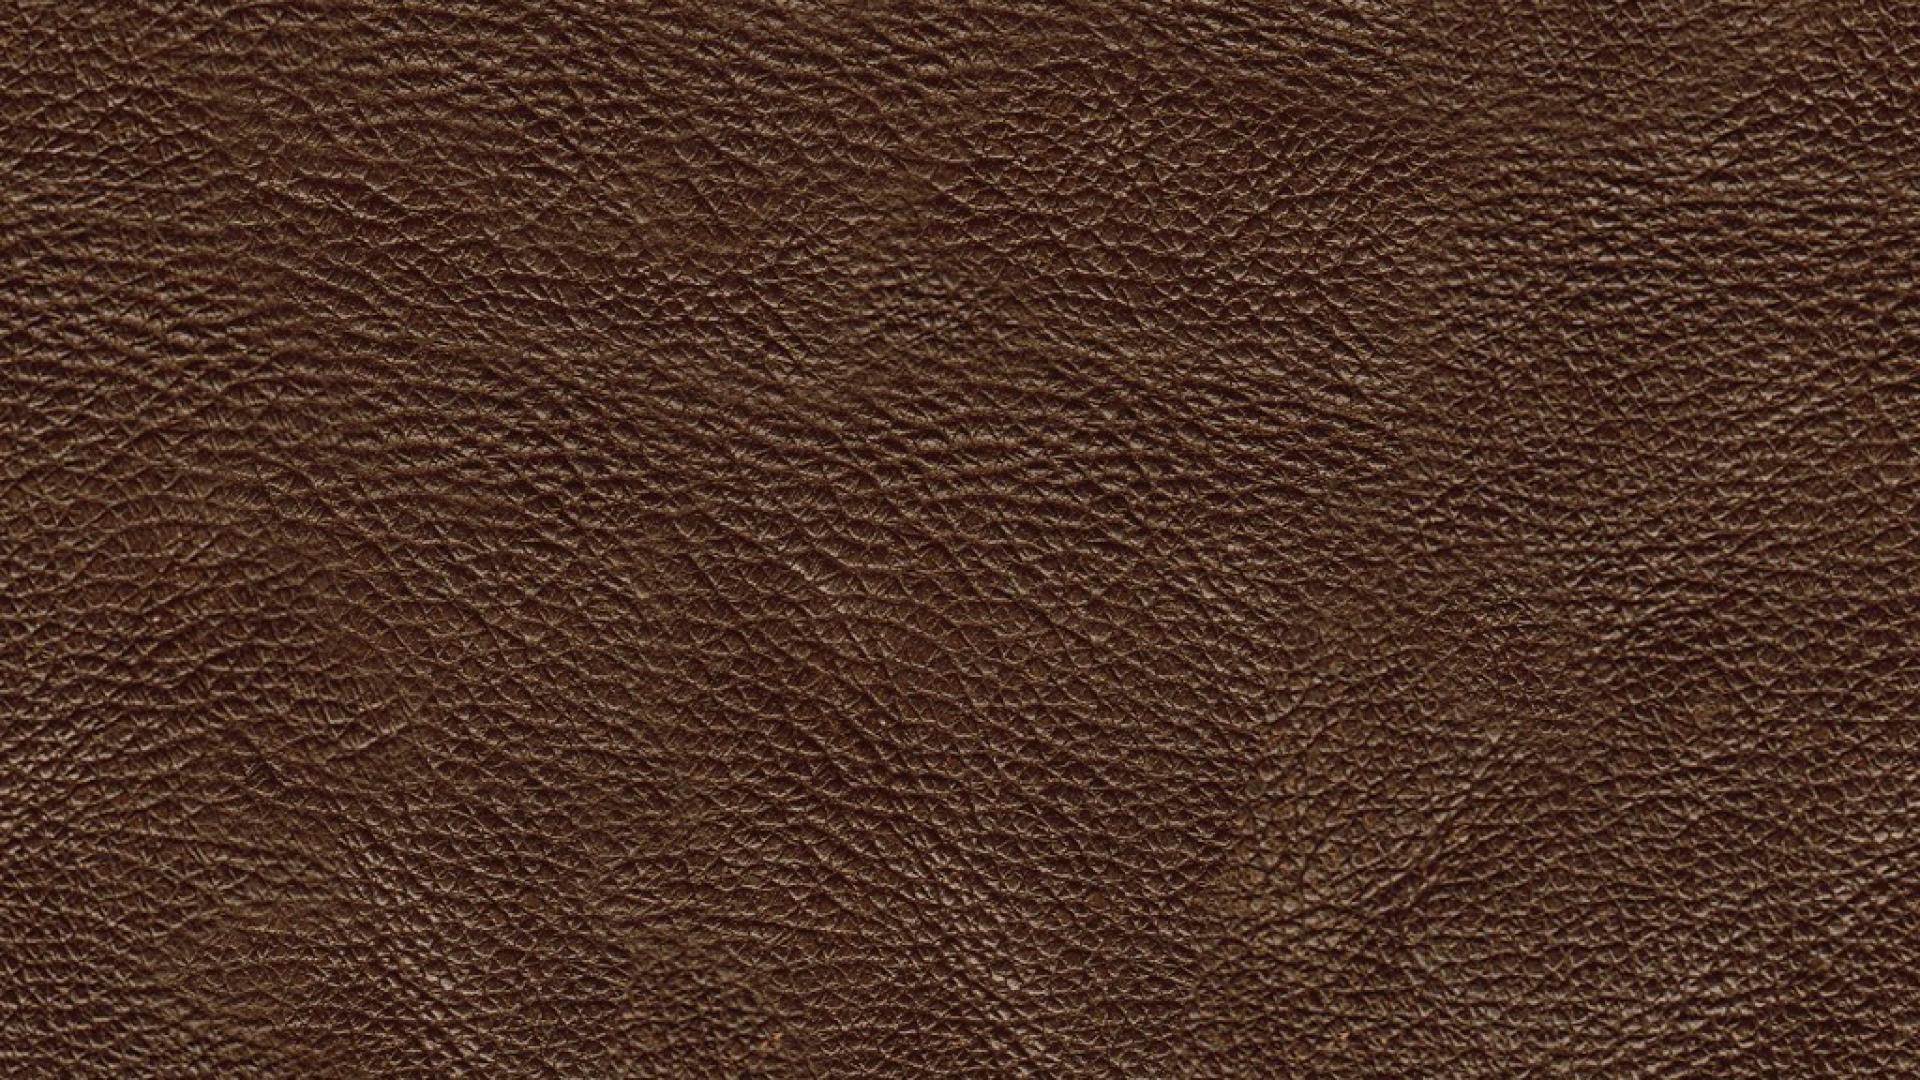 Leather brown textures wallpaper 10068